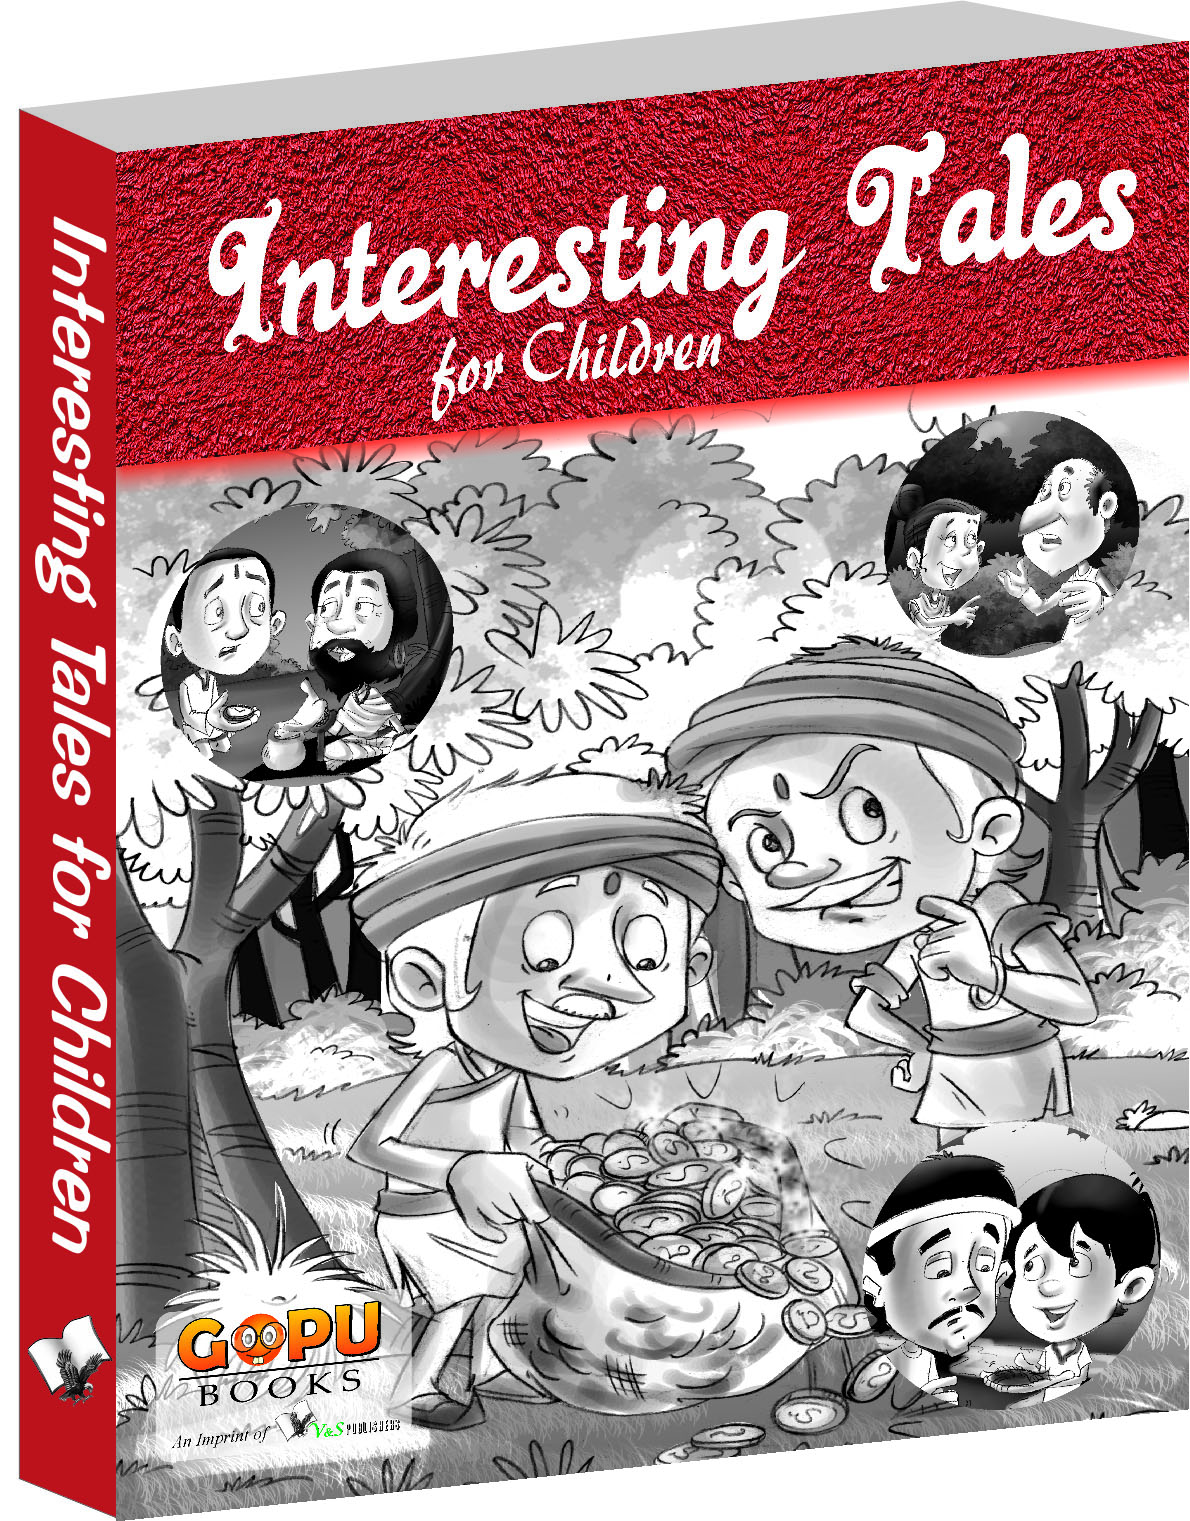 Interesting Tales-Stories that impart moral values to children